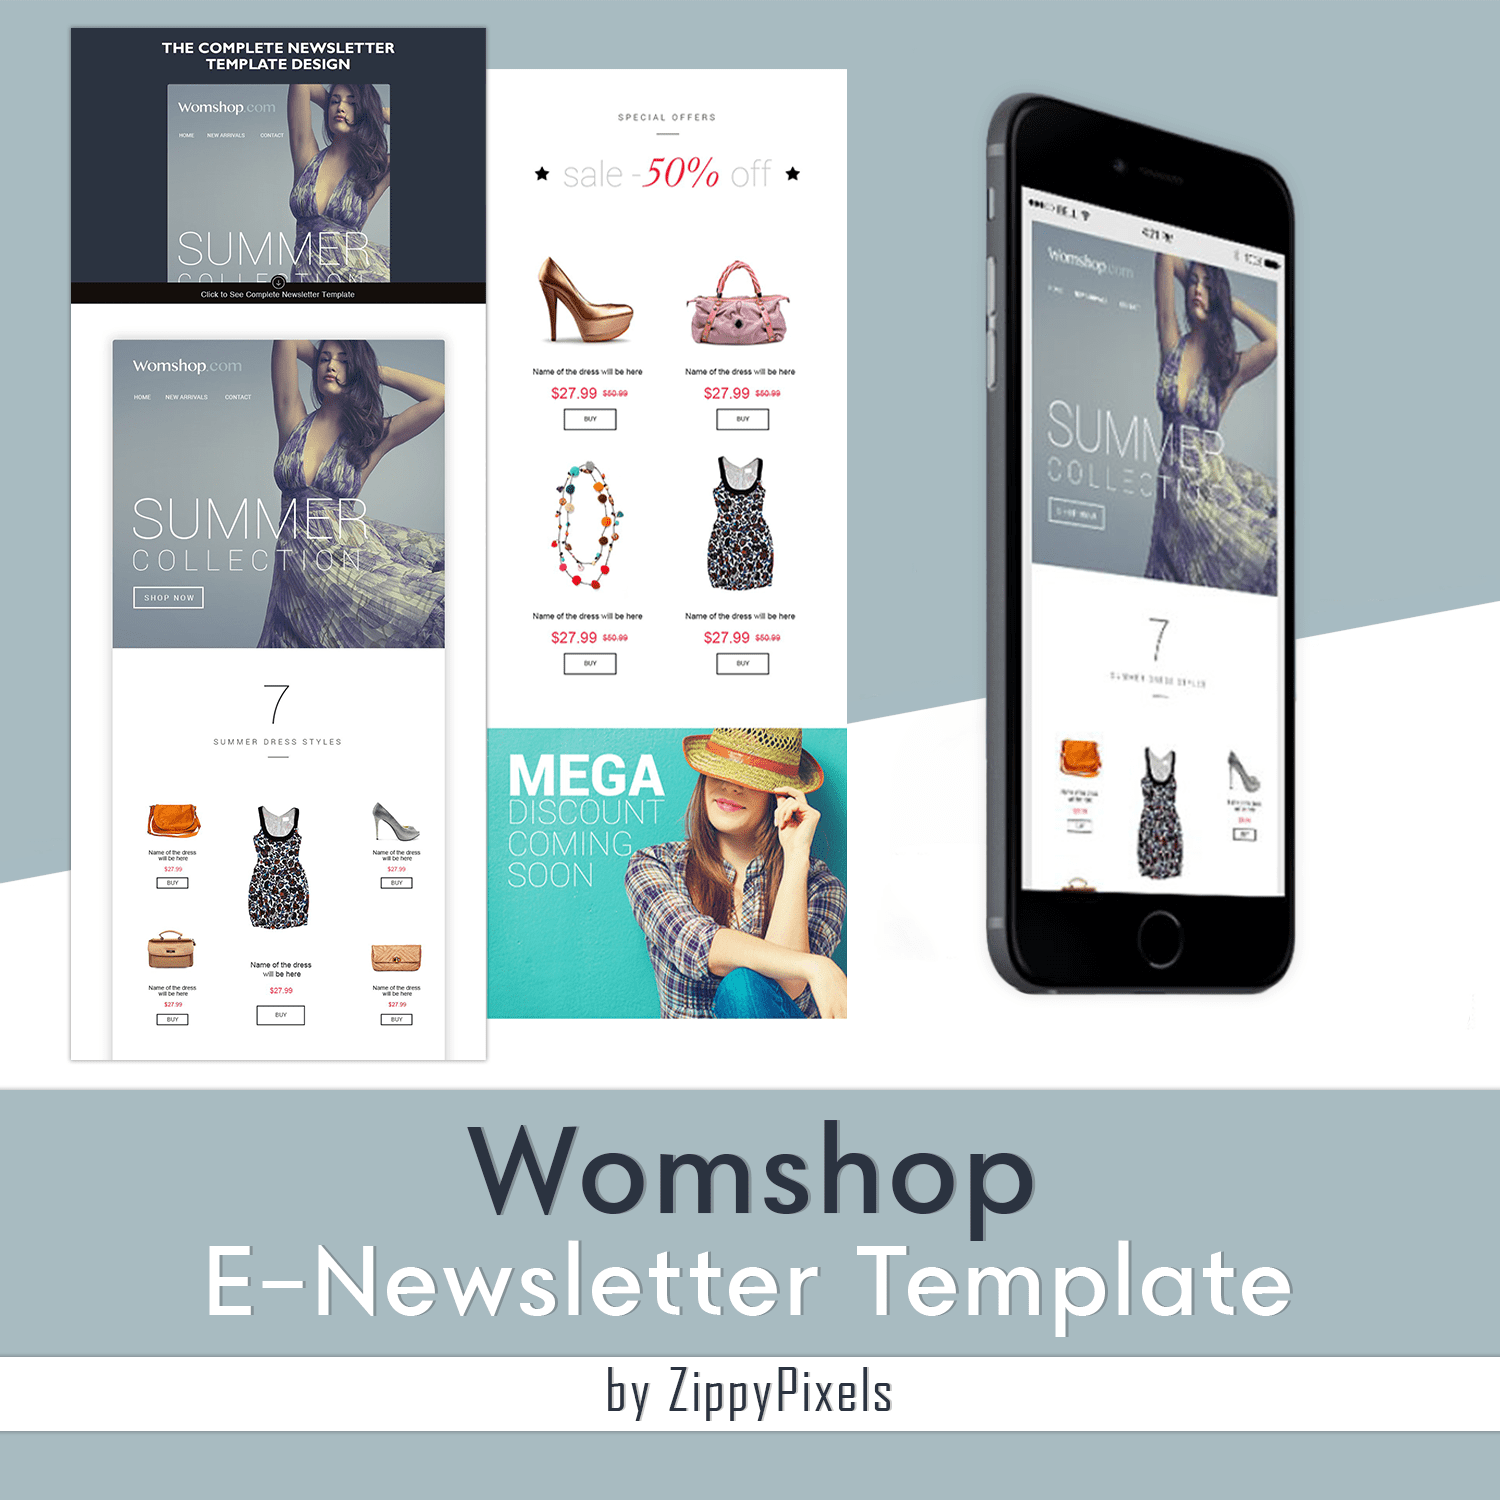 Set of images of adorable women's shop email design template.